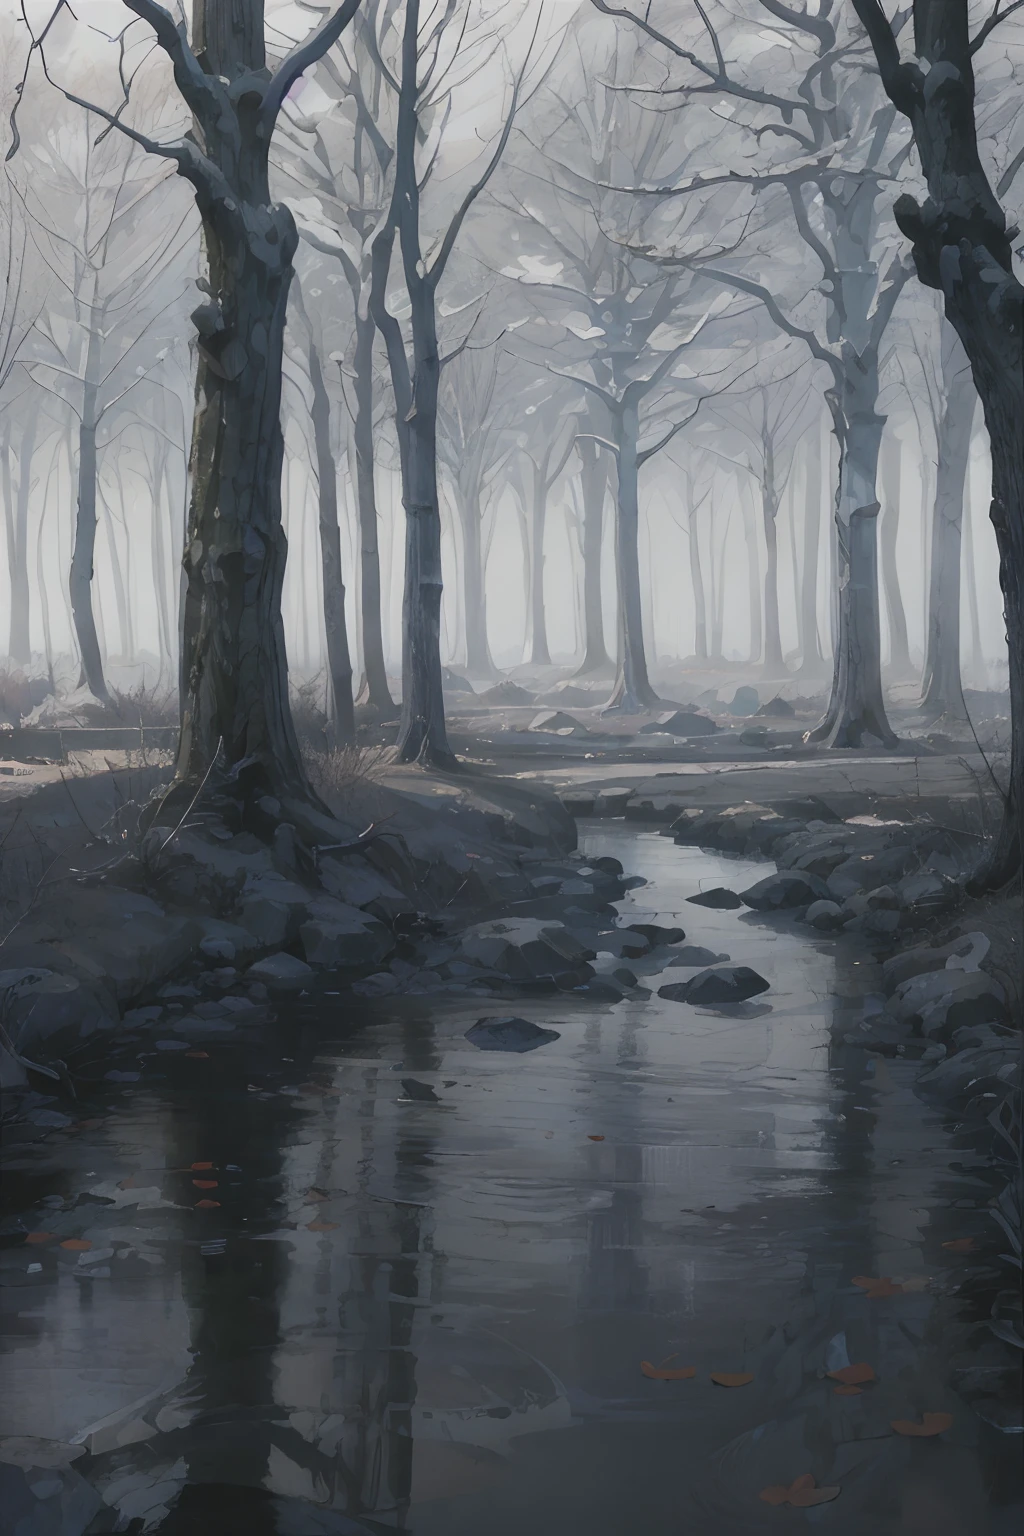 (best quality,4k,8k,highres,masterpiece:1.2),ultra-detailed,(realistic,photorealistic,photo-realistic:1.37),landscape,forest,late autumn,empty branches,depressed,dark and cold atmosphere,deep blue and gray,dense mist,motionless air,morning dew,tranquil and serene,subtle rays of sunlight,stillness and silence,subdued color palette,dry fallen leaves,desolate and melancholic,majestic trees,gnarled tree trunks,cold wind whispering through the trees,hidden secrets,uncharted paths,mysterious aura,undisturbed tranquility,breathtaking scenery,peaceful solitude,serene reflections in a calm lake,ethereal beauty,soft shadows and highlights,sublime nature,autumnal colors and textures,dappled sunlight on the forest floor,breathtaking perspective,vibrant oranges and rusty reds,majestic mountains in the distance,subtle hints of life amidst the emptiness,distant sounds of forest creatures,whispering of the wind,overwhelming sense of nature's power and beauty,embrace the stillness and beauty of the season.